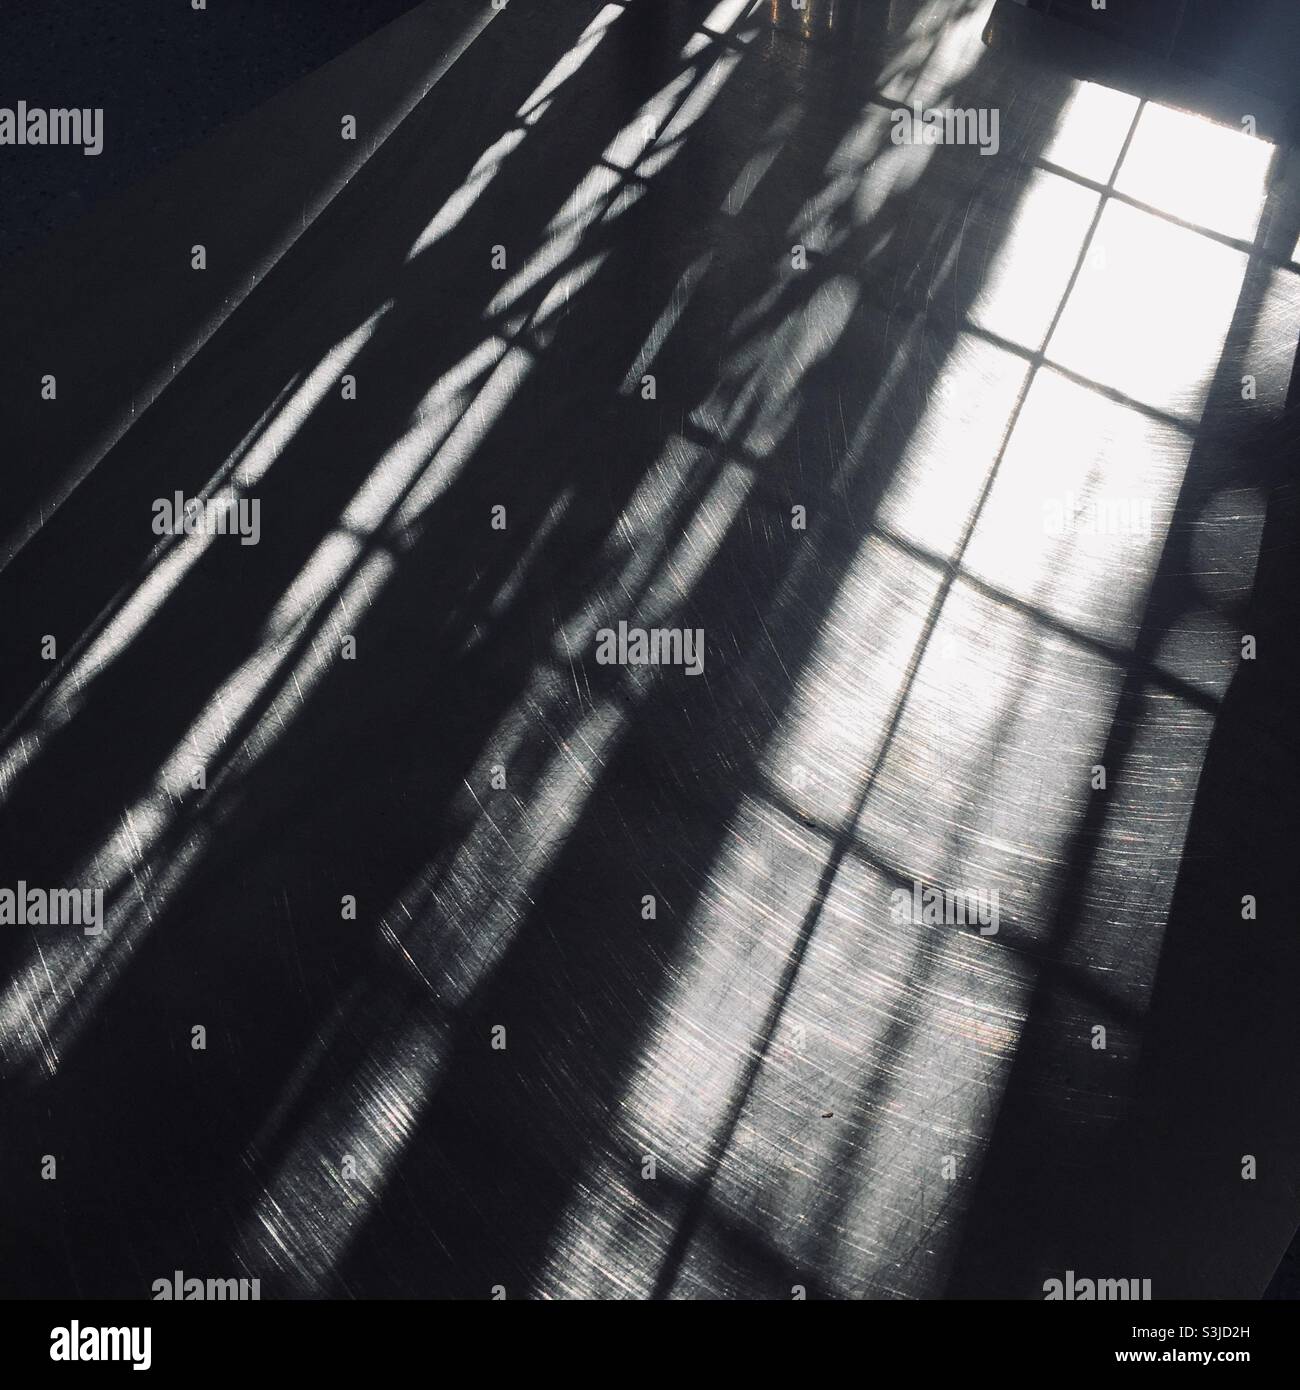 Light reflections in chrome metal abstract Stock Photo